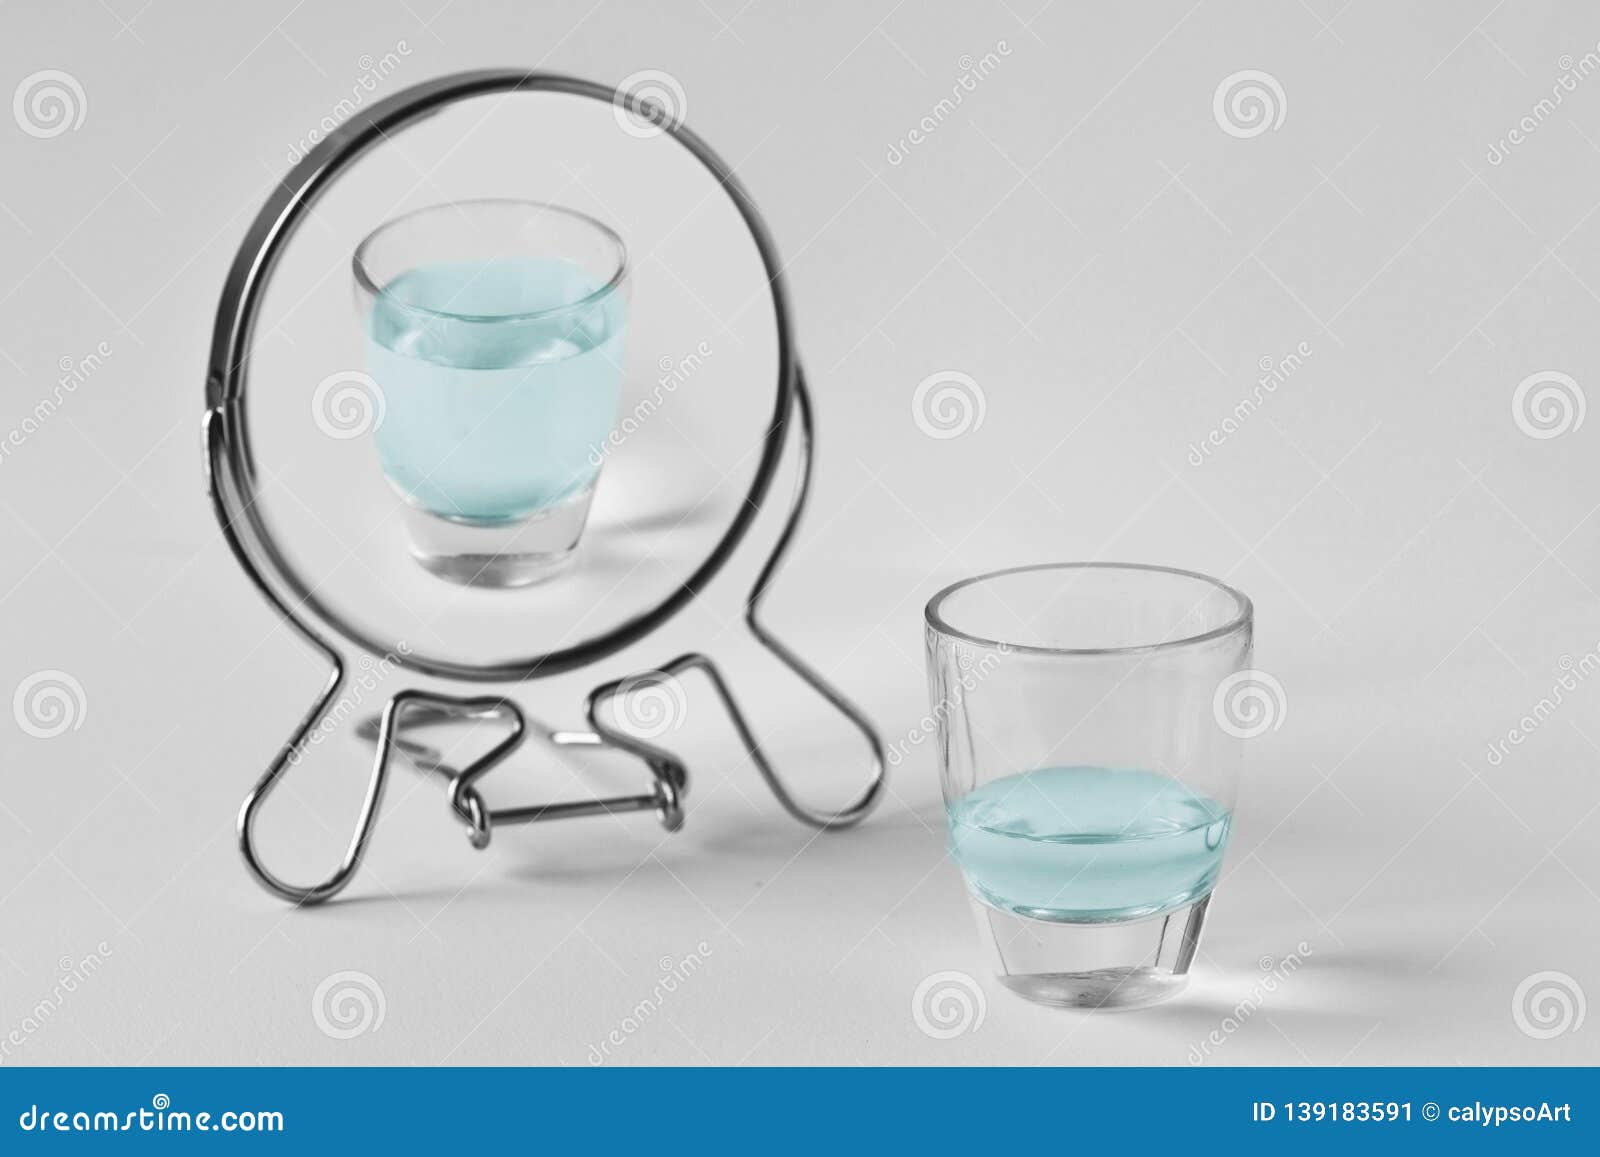 half-empty water glass looking in the mirror and seeing himself as a full glass - concept of optimism